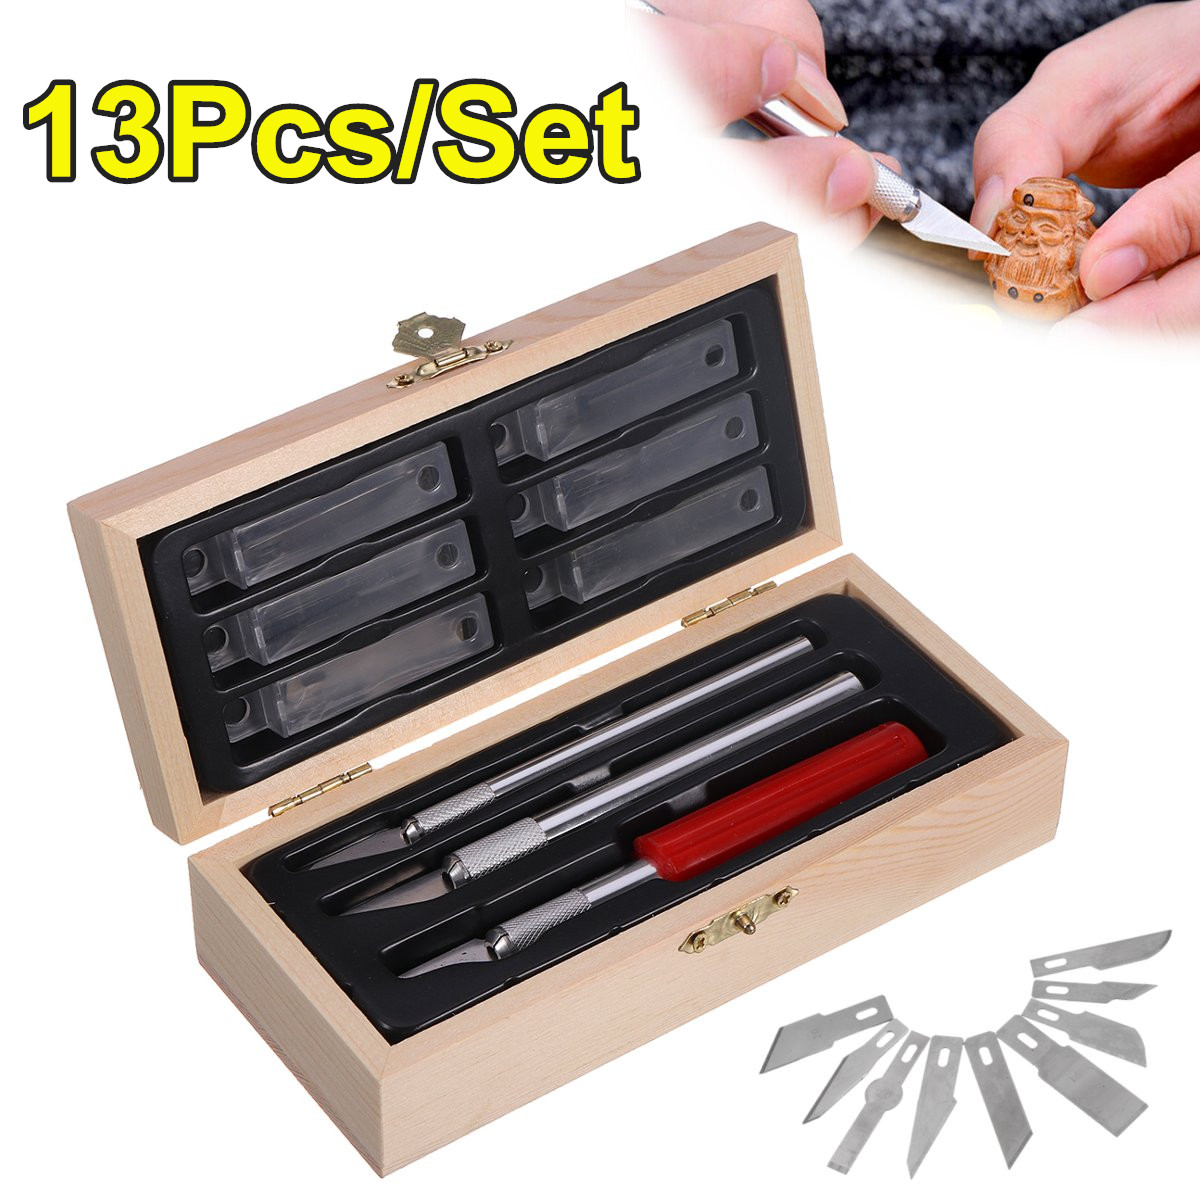 13PcsSet-Carving-Craft-Knive-Pen-Engraving-Blade-Wood-Cutter-Repair-Hand-Tools-Kit-1707554-1